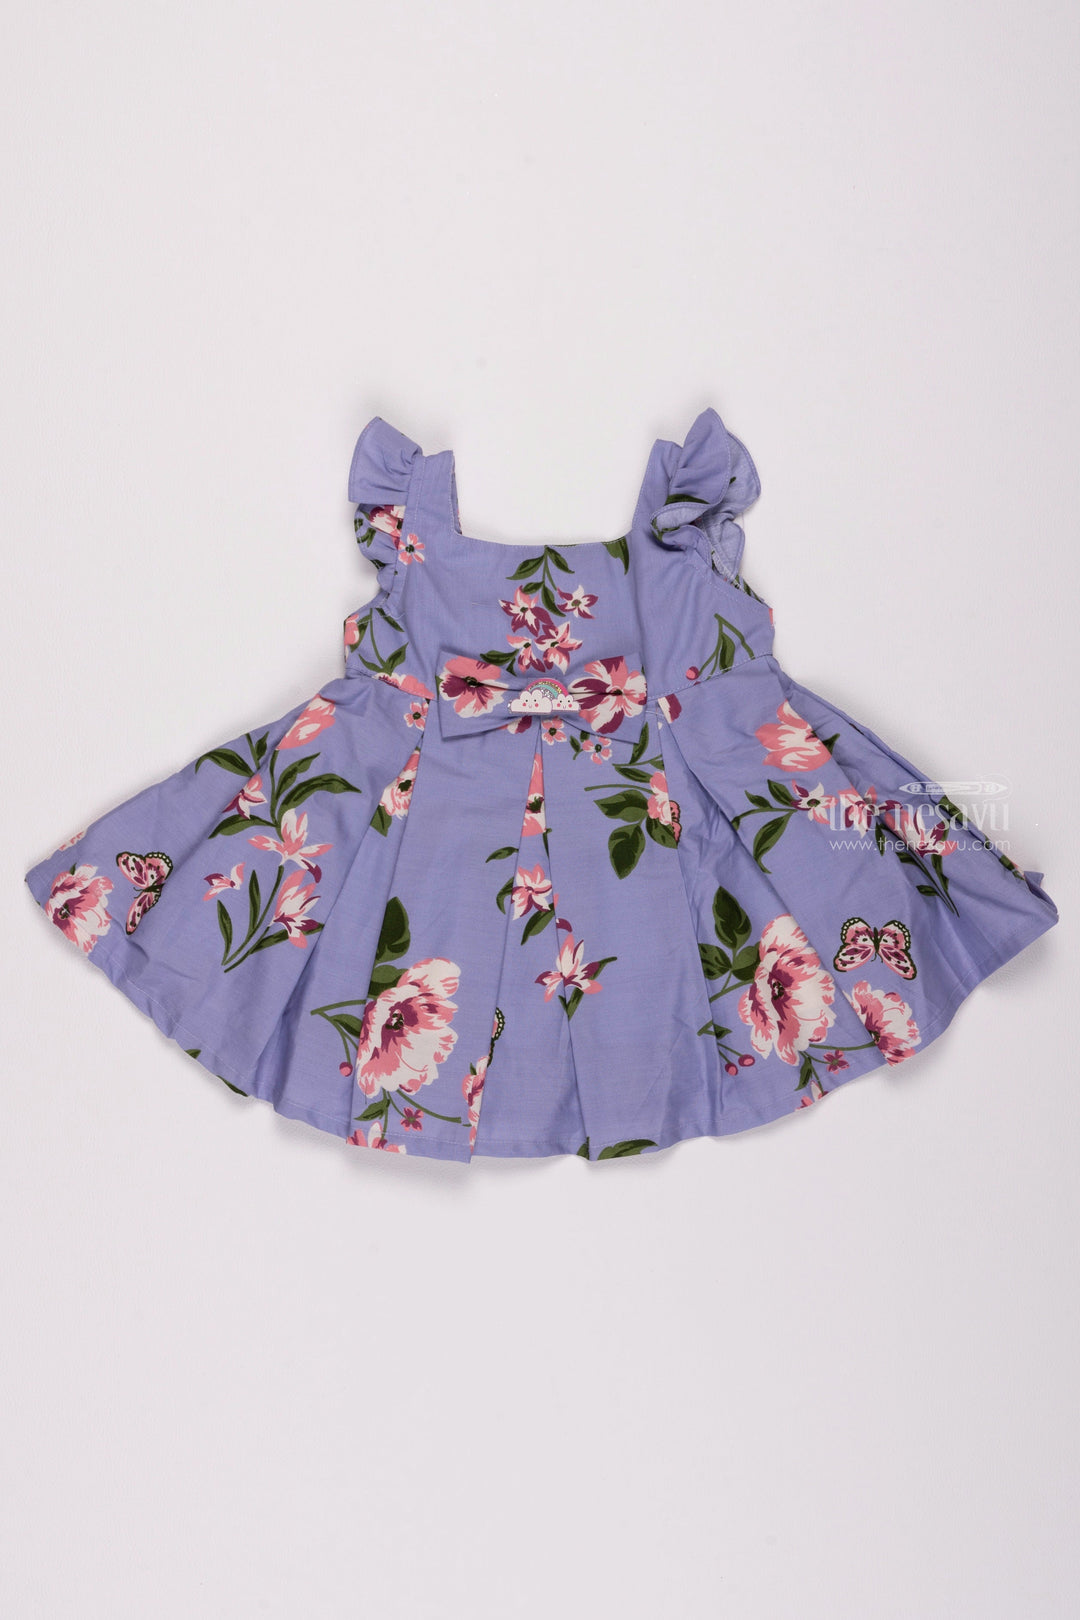 The Nesavu Baby Cotton Frocks Purple Whisper: Violet Frock with Floral Harmony, Box Pleats, and Bow Touch Nesavu 14 (6M) / Purple / Cotton BFJ467B-14 Adorable Newborn Gowns | Soft Fabric Baby Dresses | The Nesavu